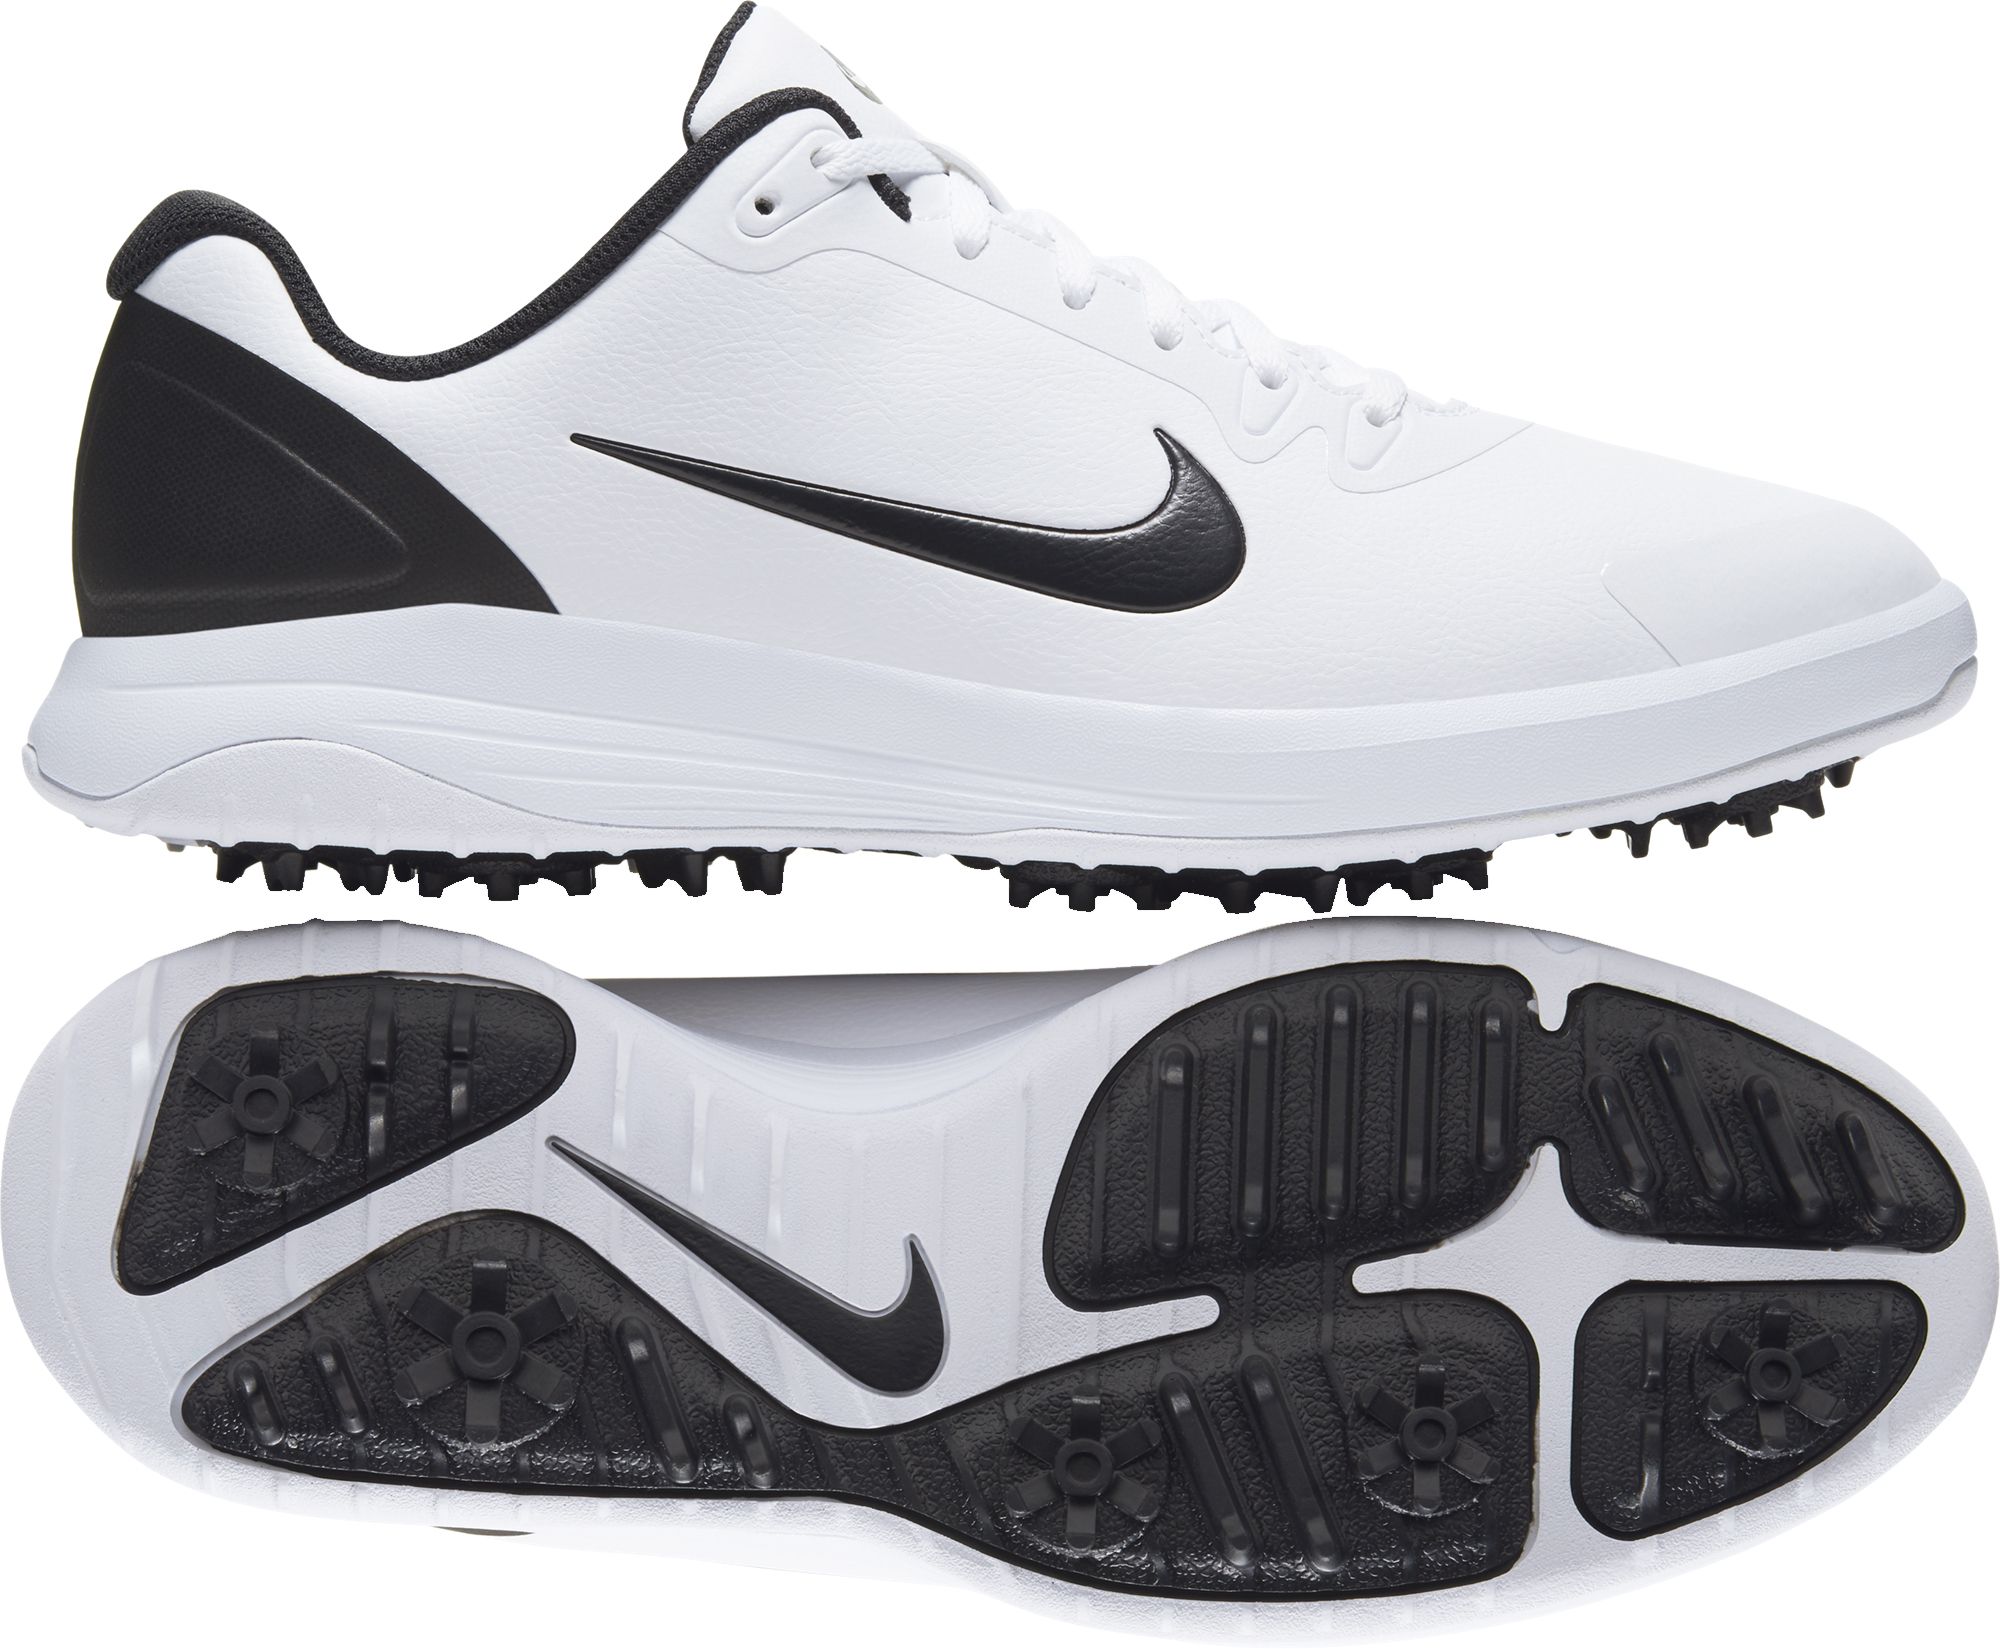 nike infinity g golf shoes cheap online